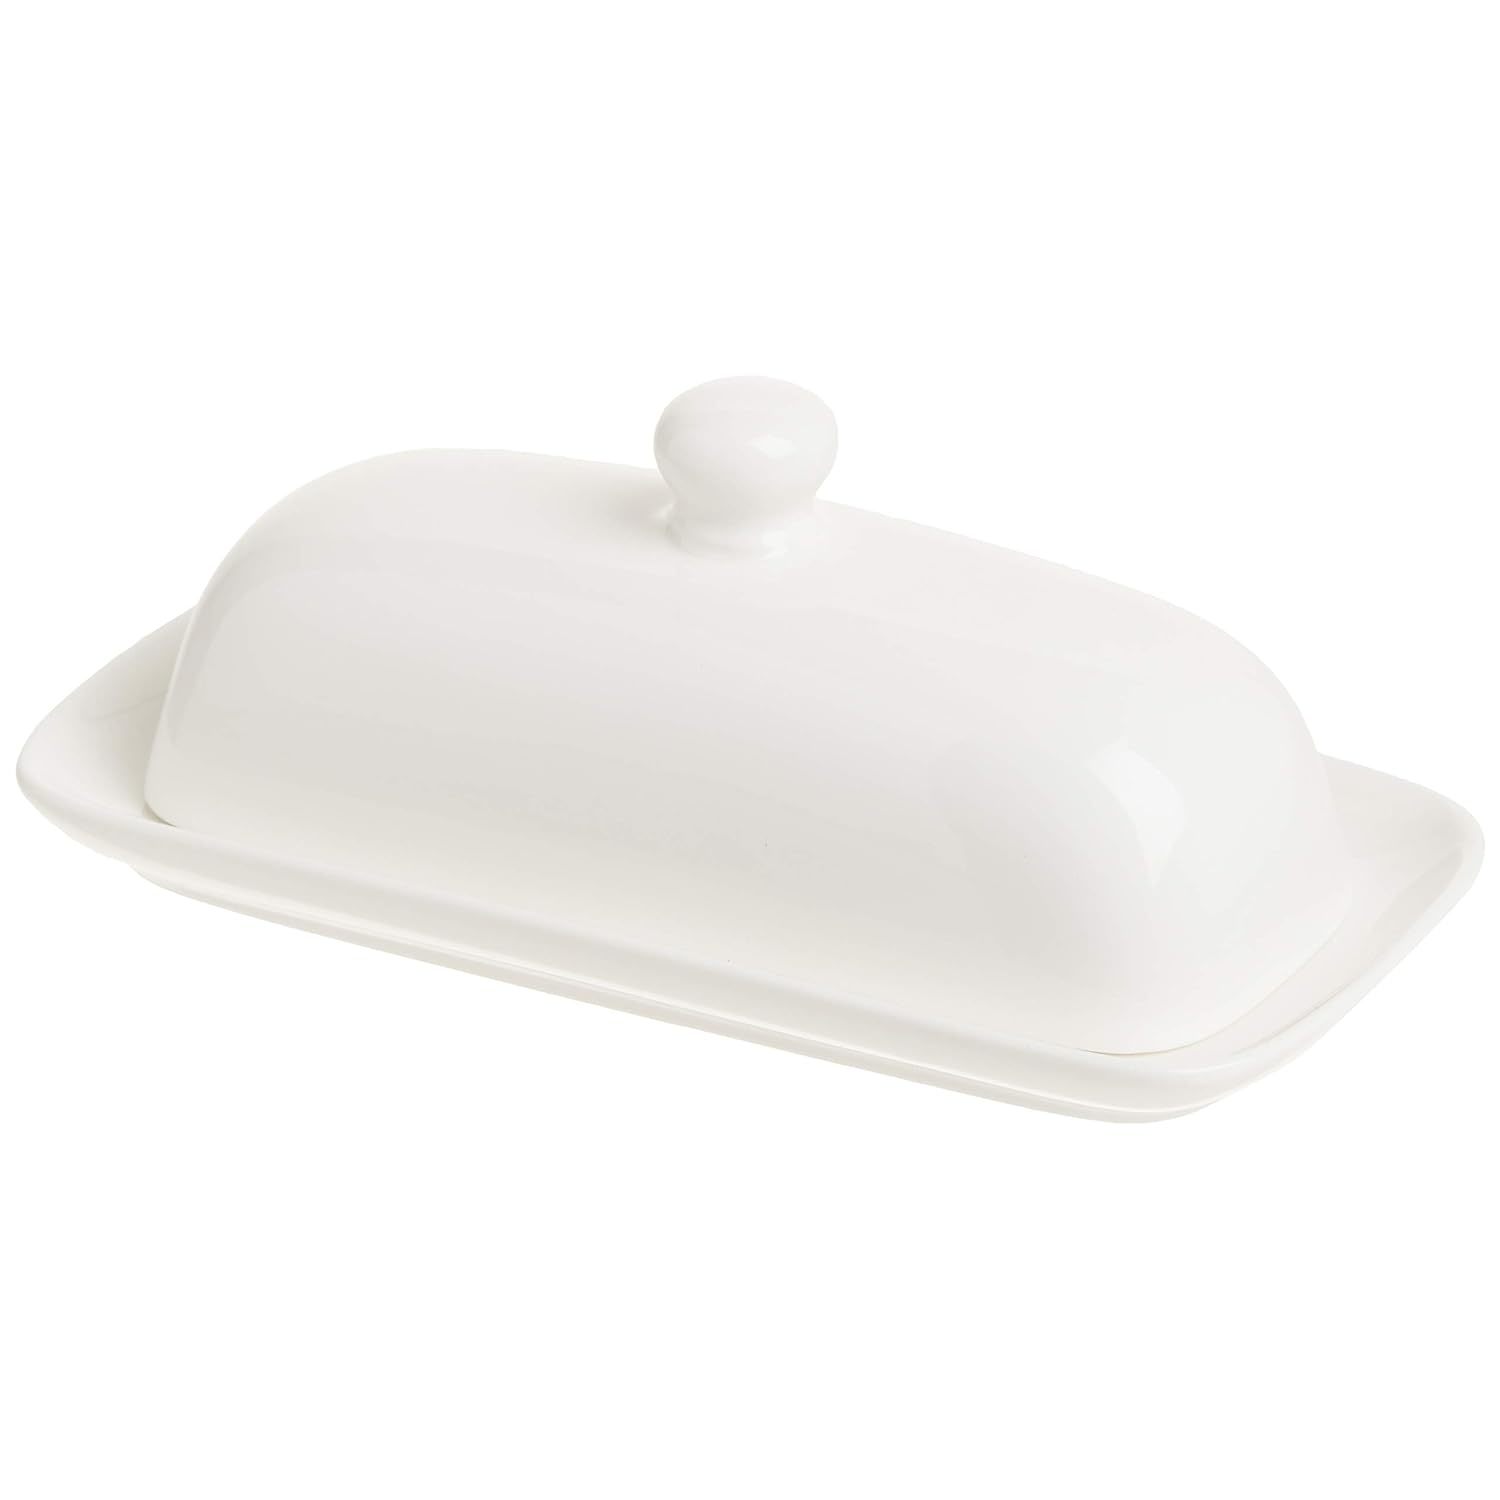 Norpro 8370 Butter Dish, one, White - $26.59